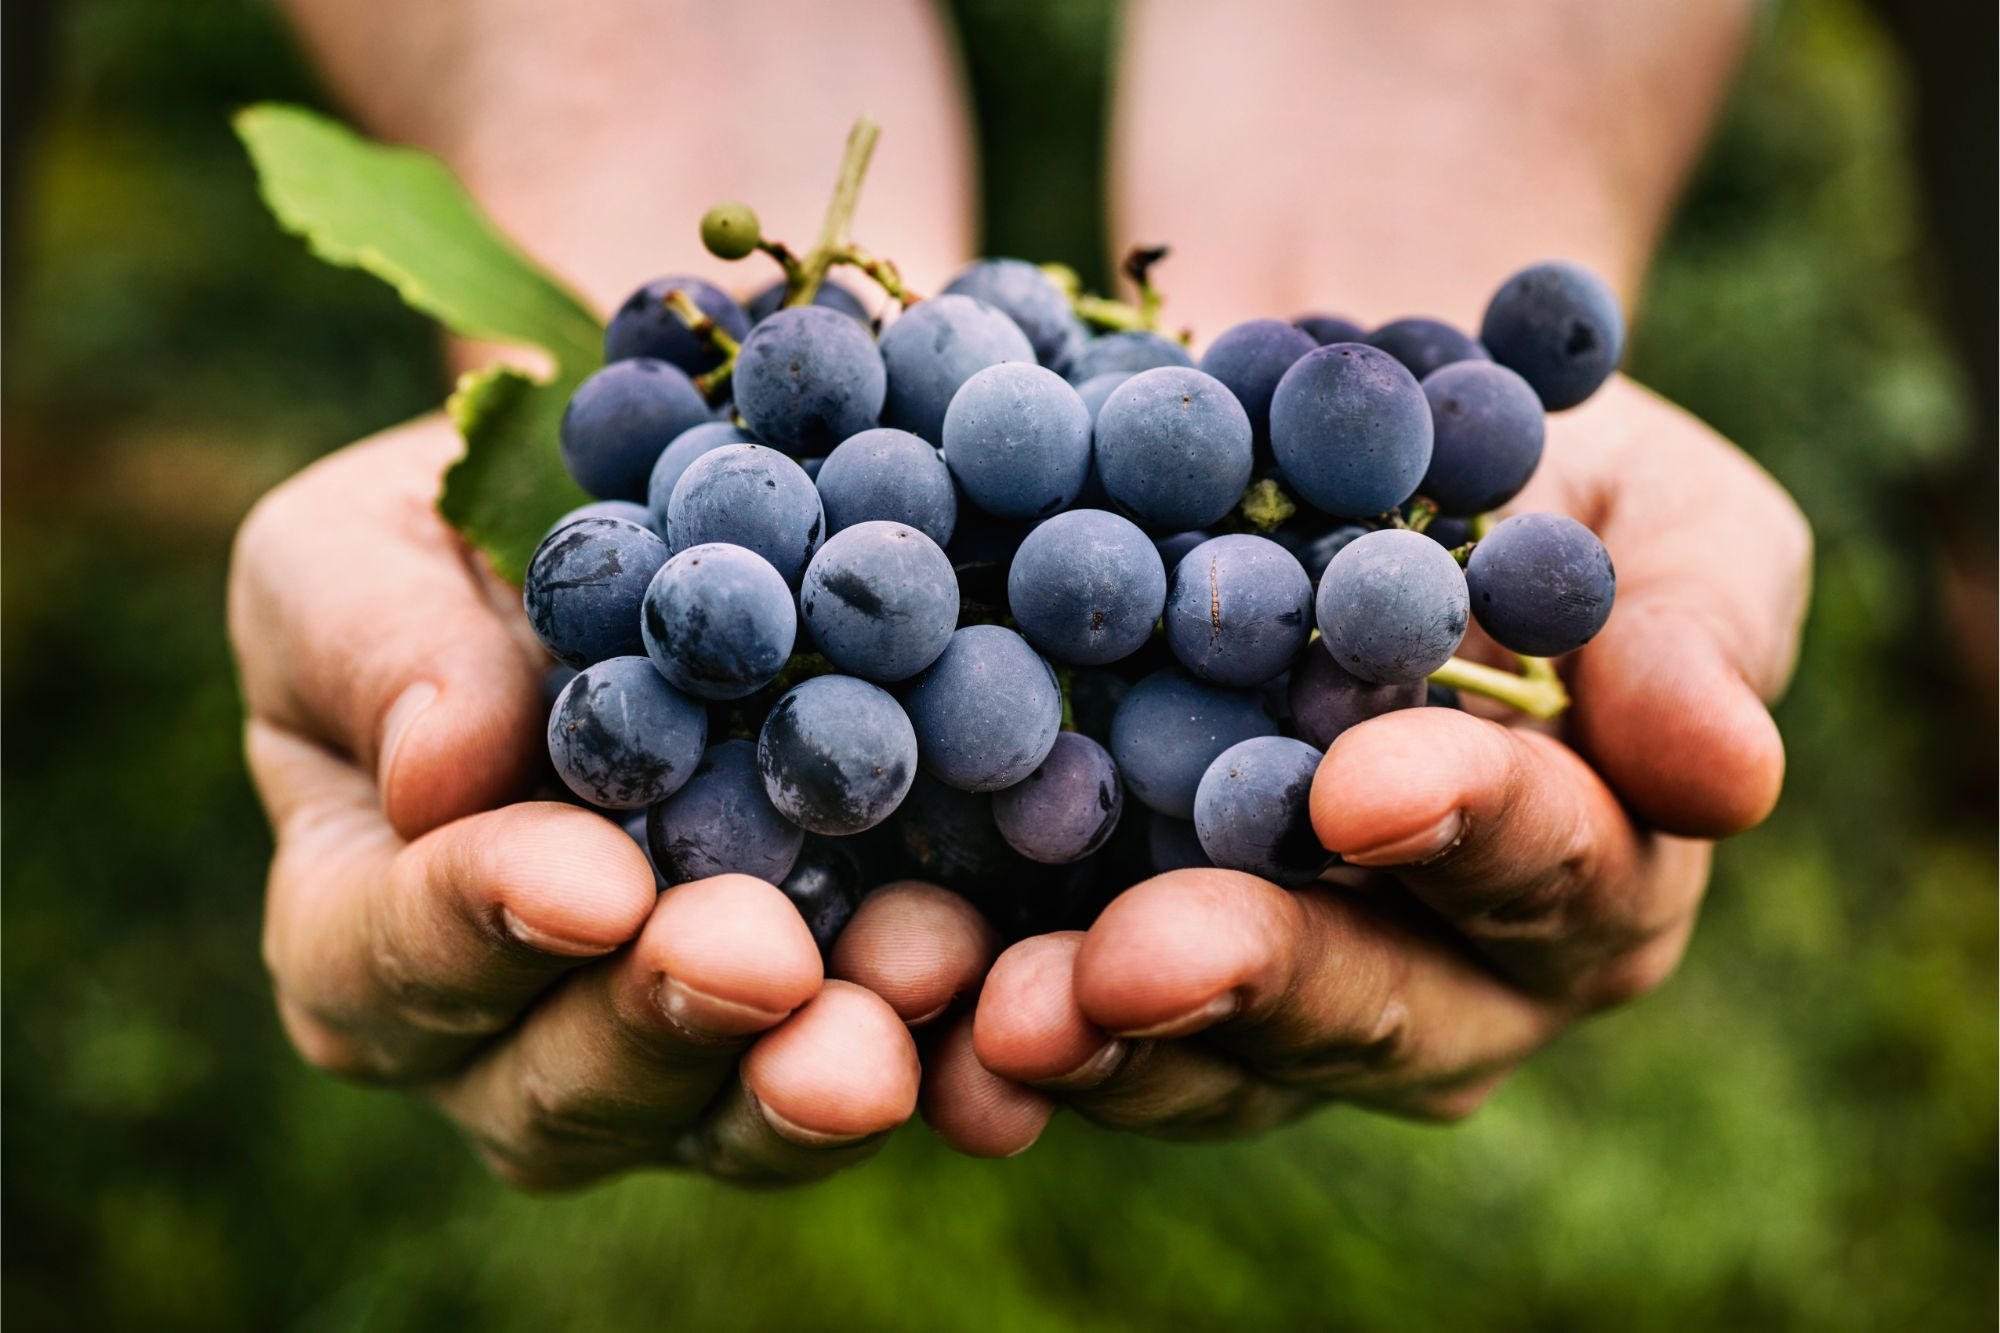 New Research: Eating Grapes Can Protect Against UV Damage to Skin – SciTechDaily